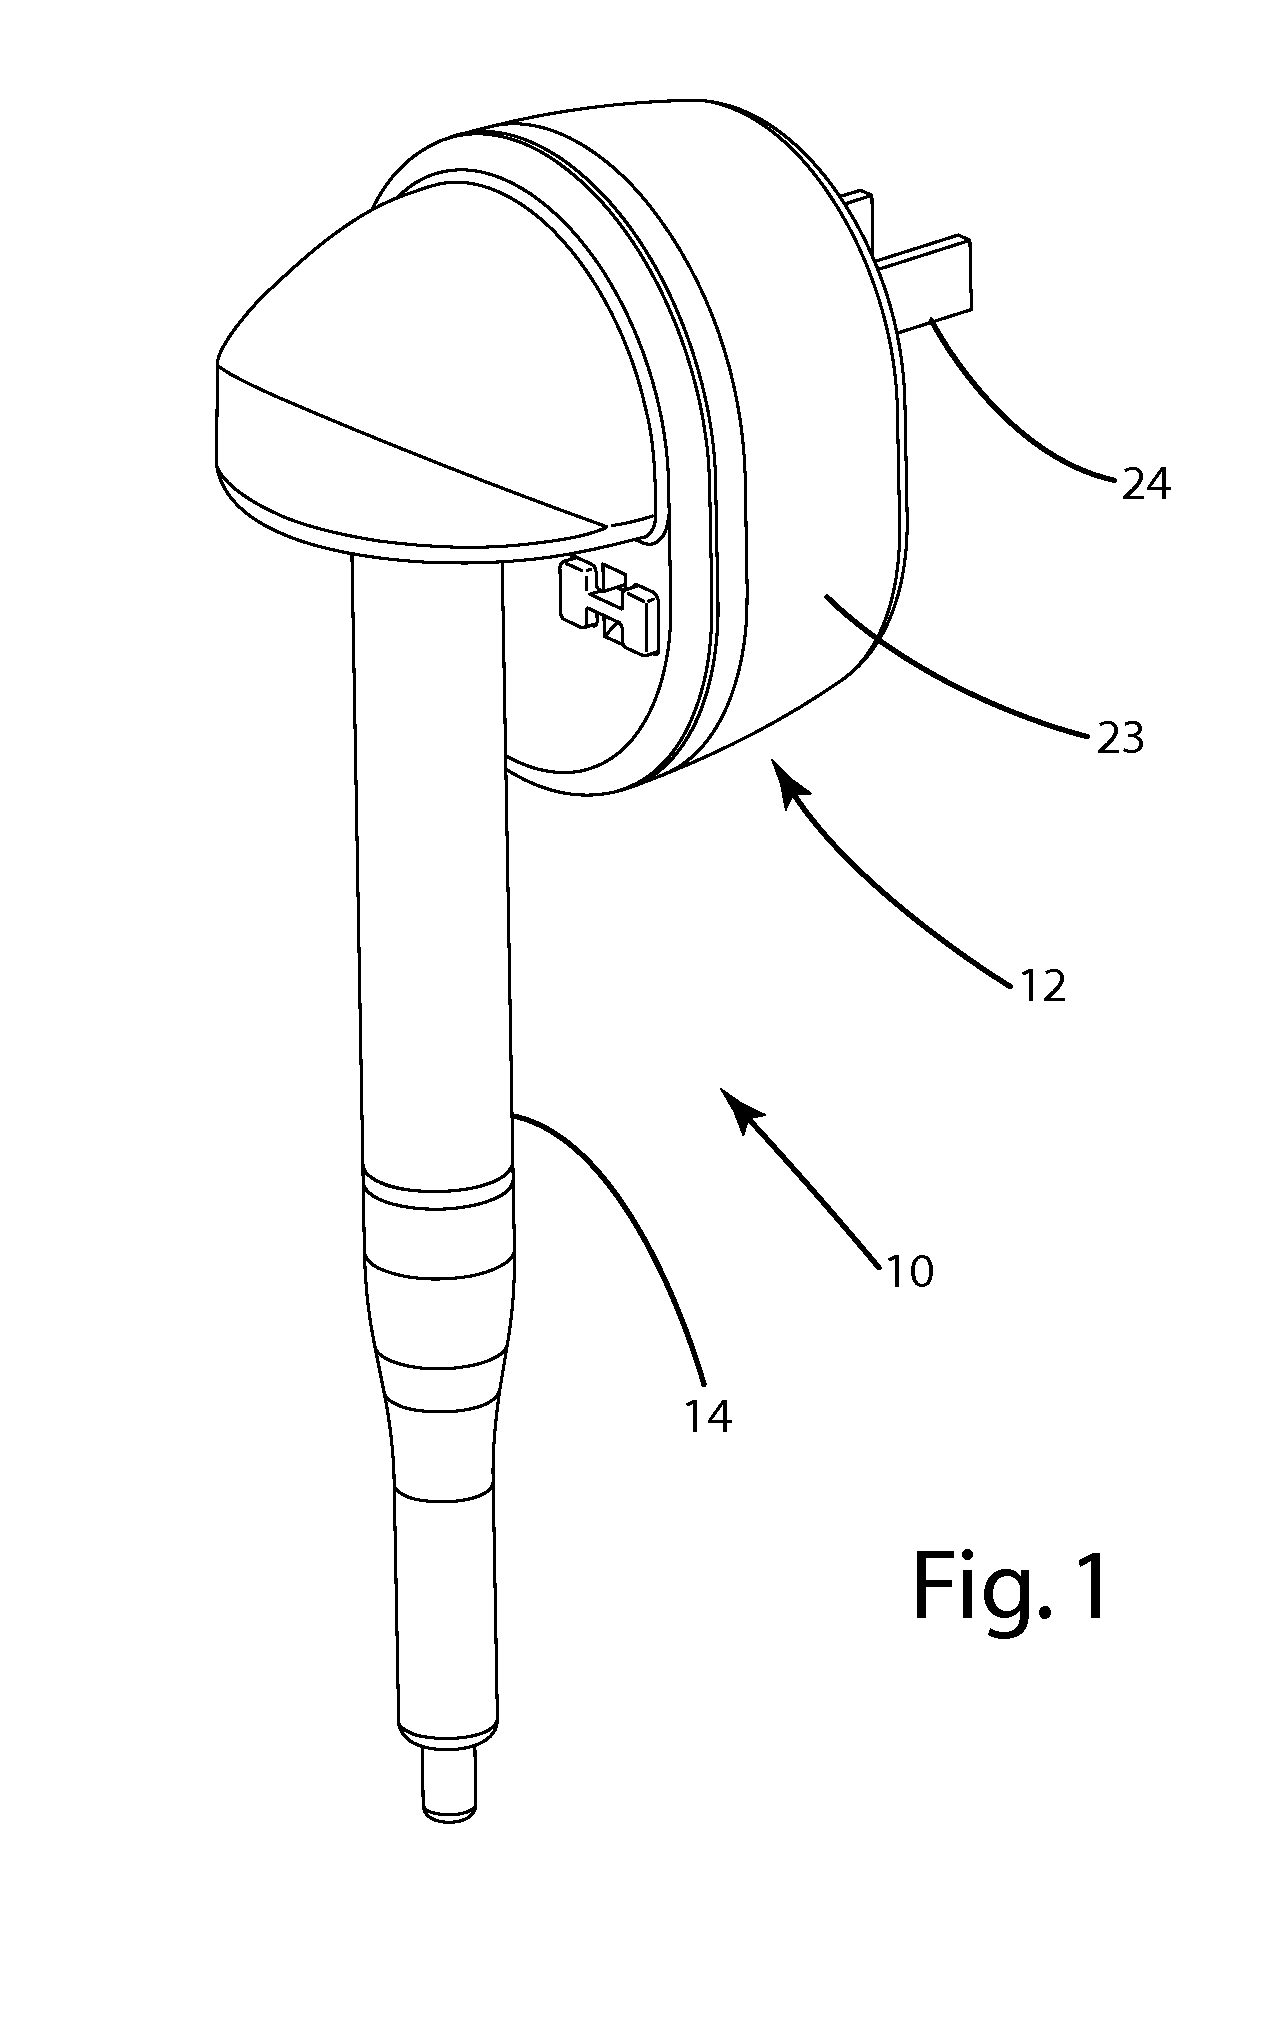 Inductively-heated applicator system